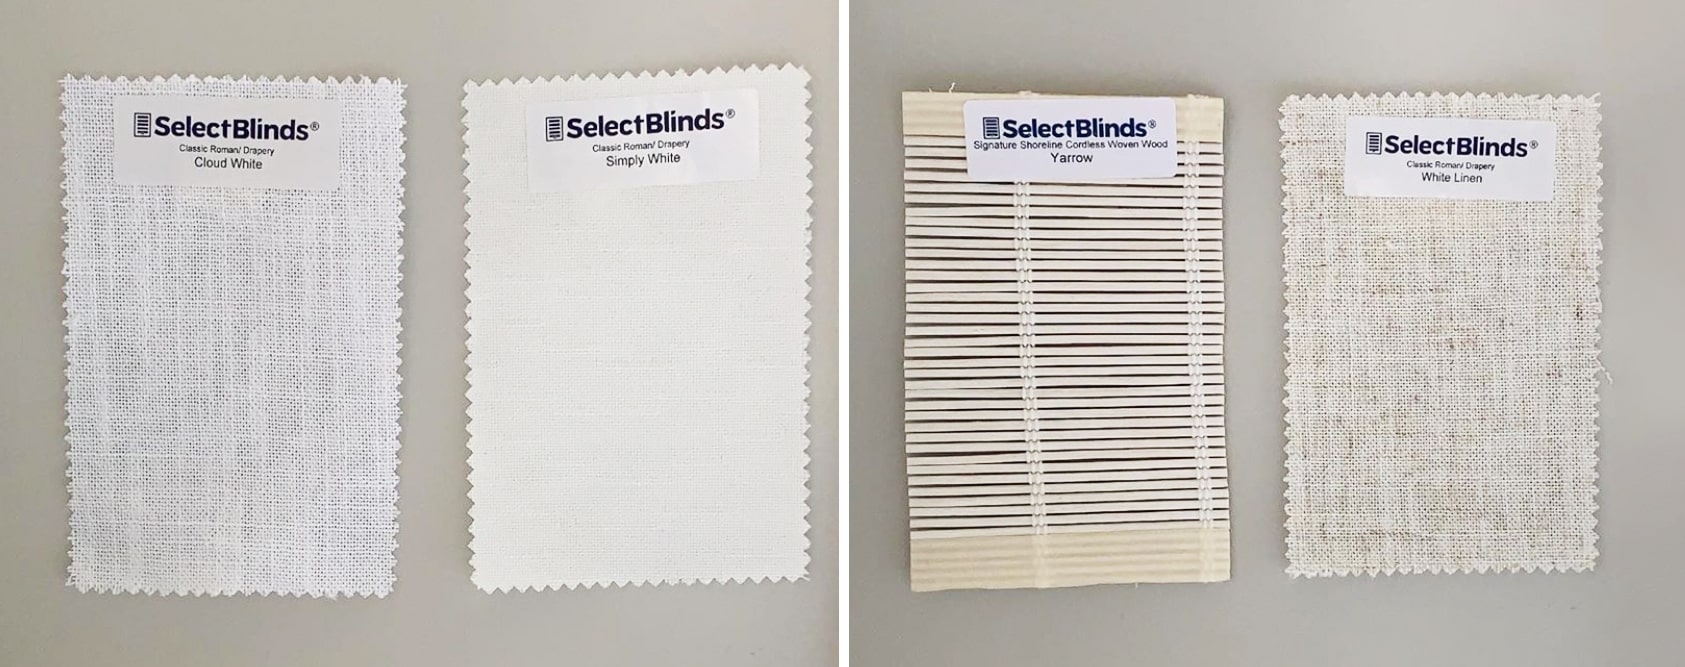 Select Blinds Samples